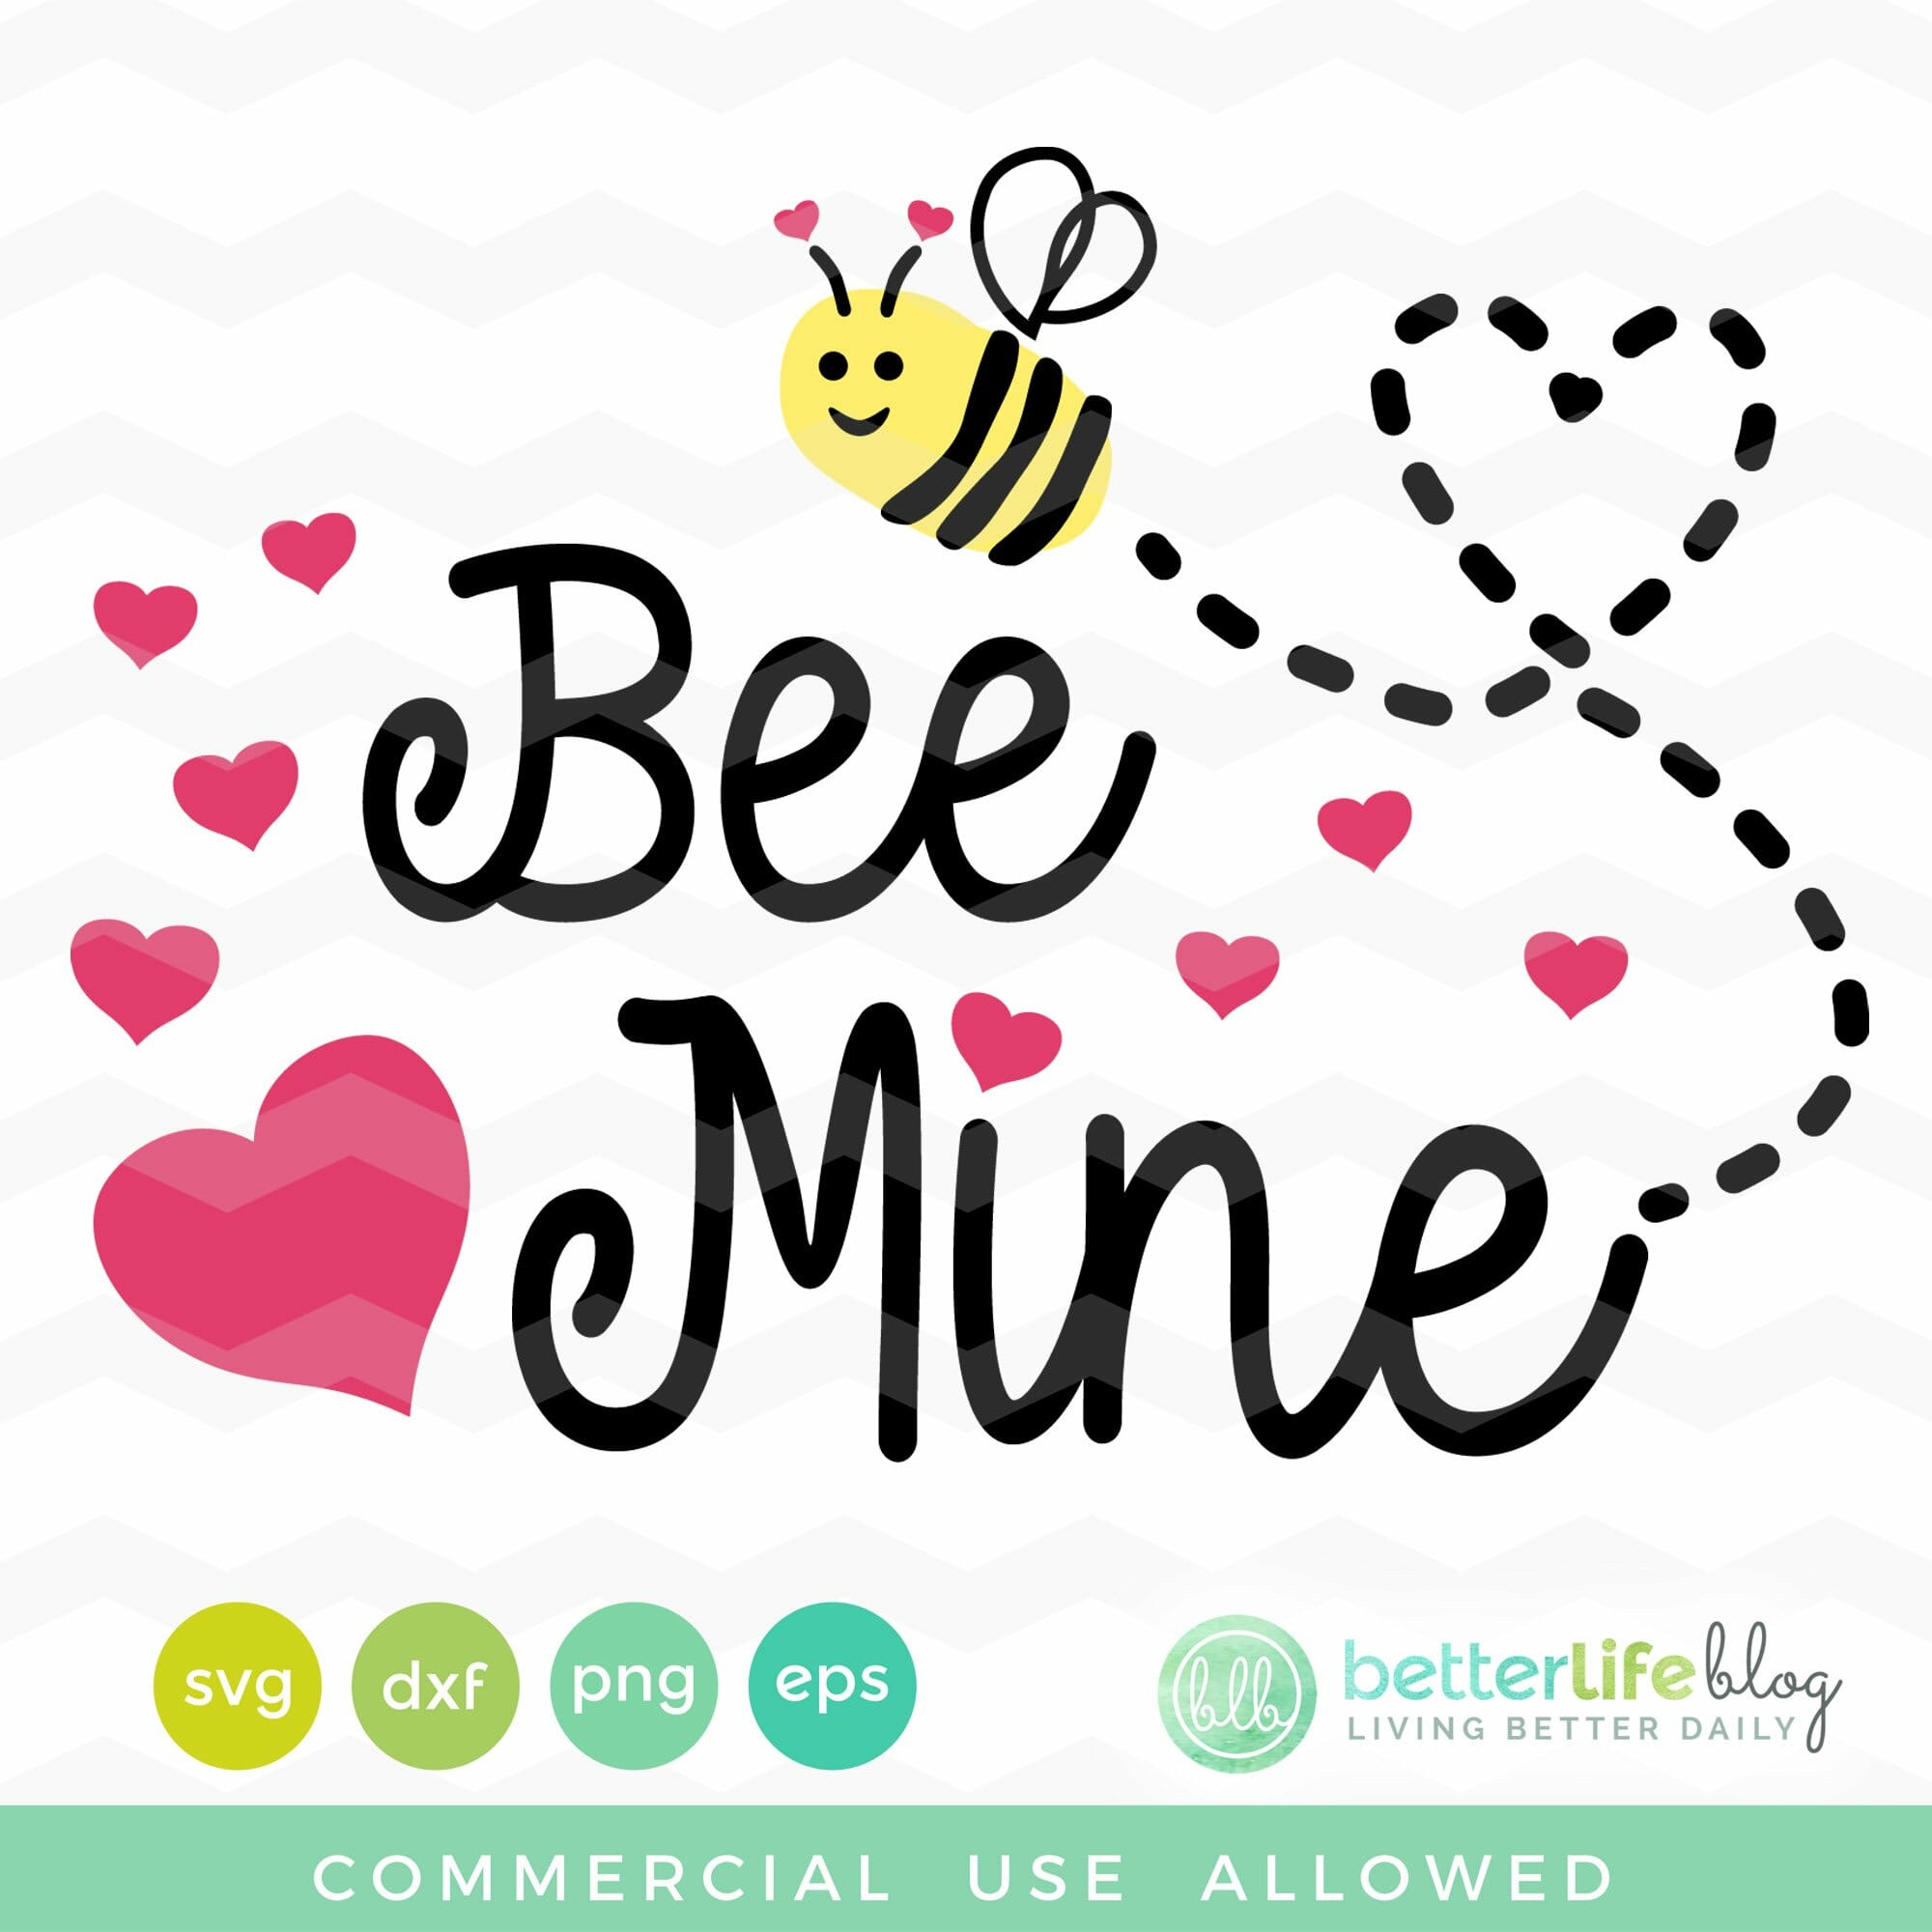 Bee Mine SVG File from Better Life Blog